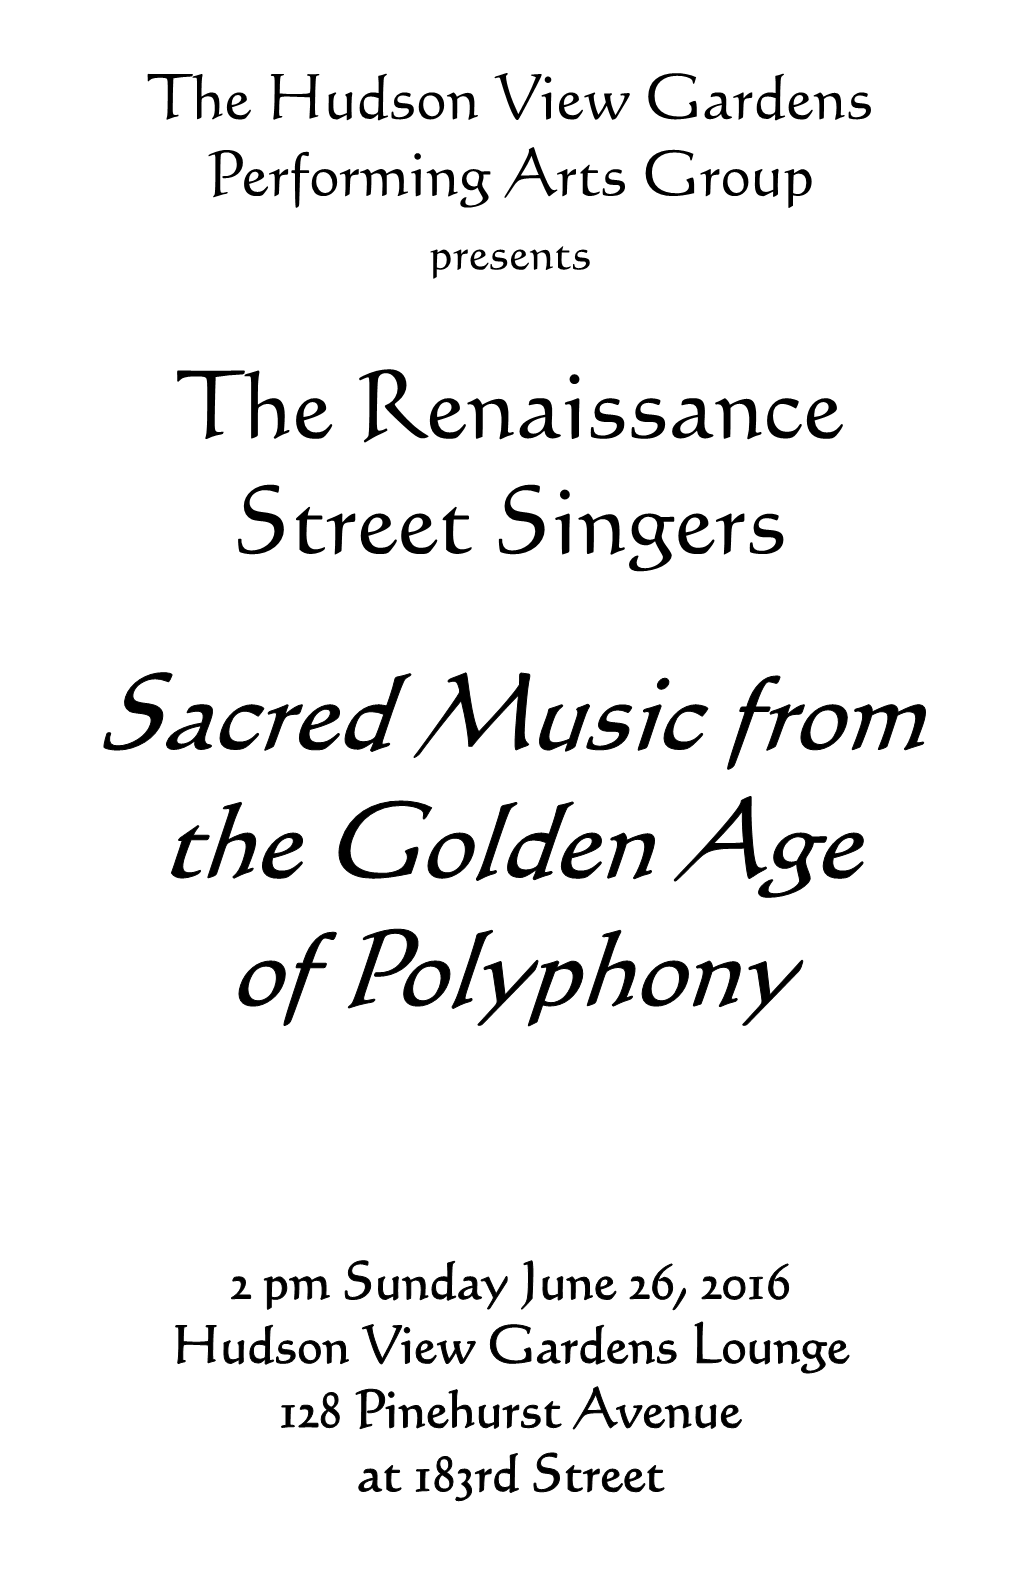 Sacred Music from the Golden Age of Polyphony